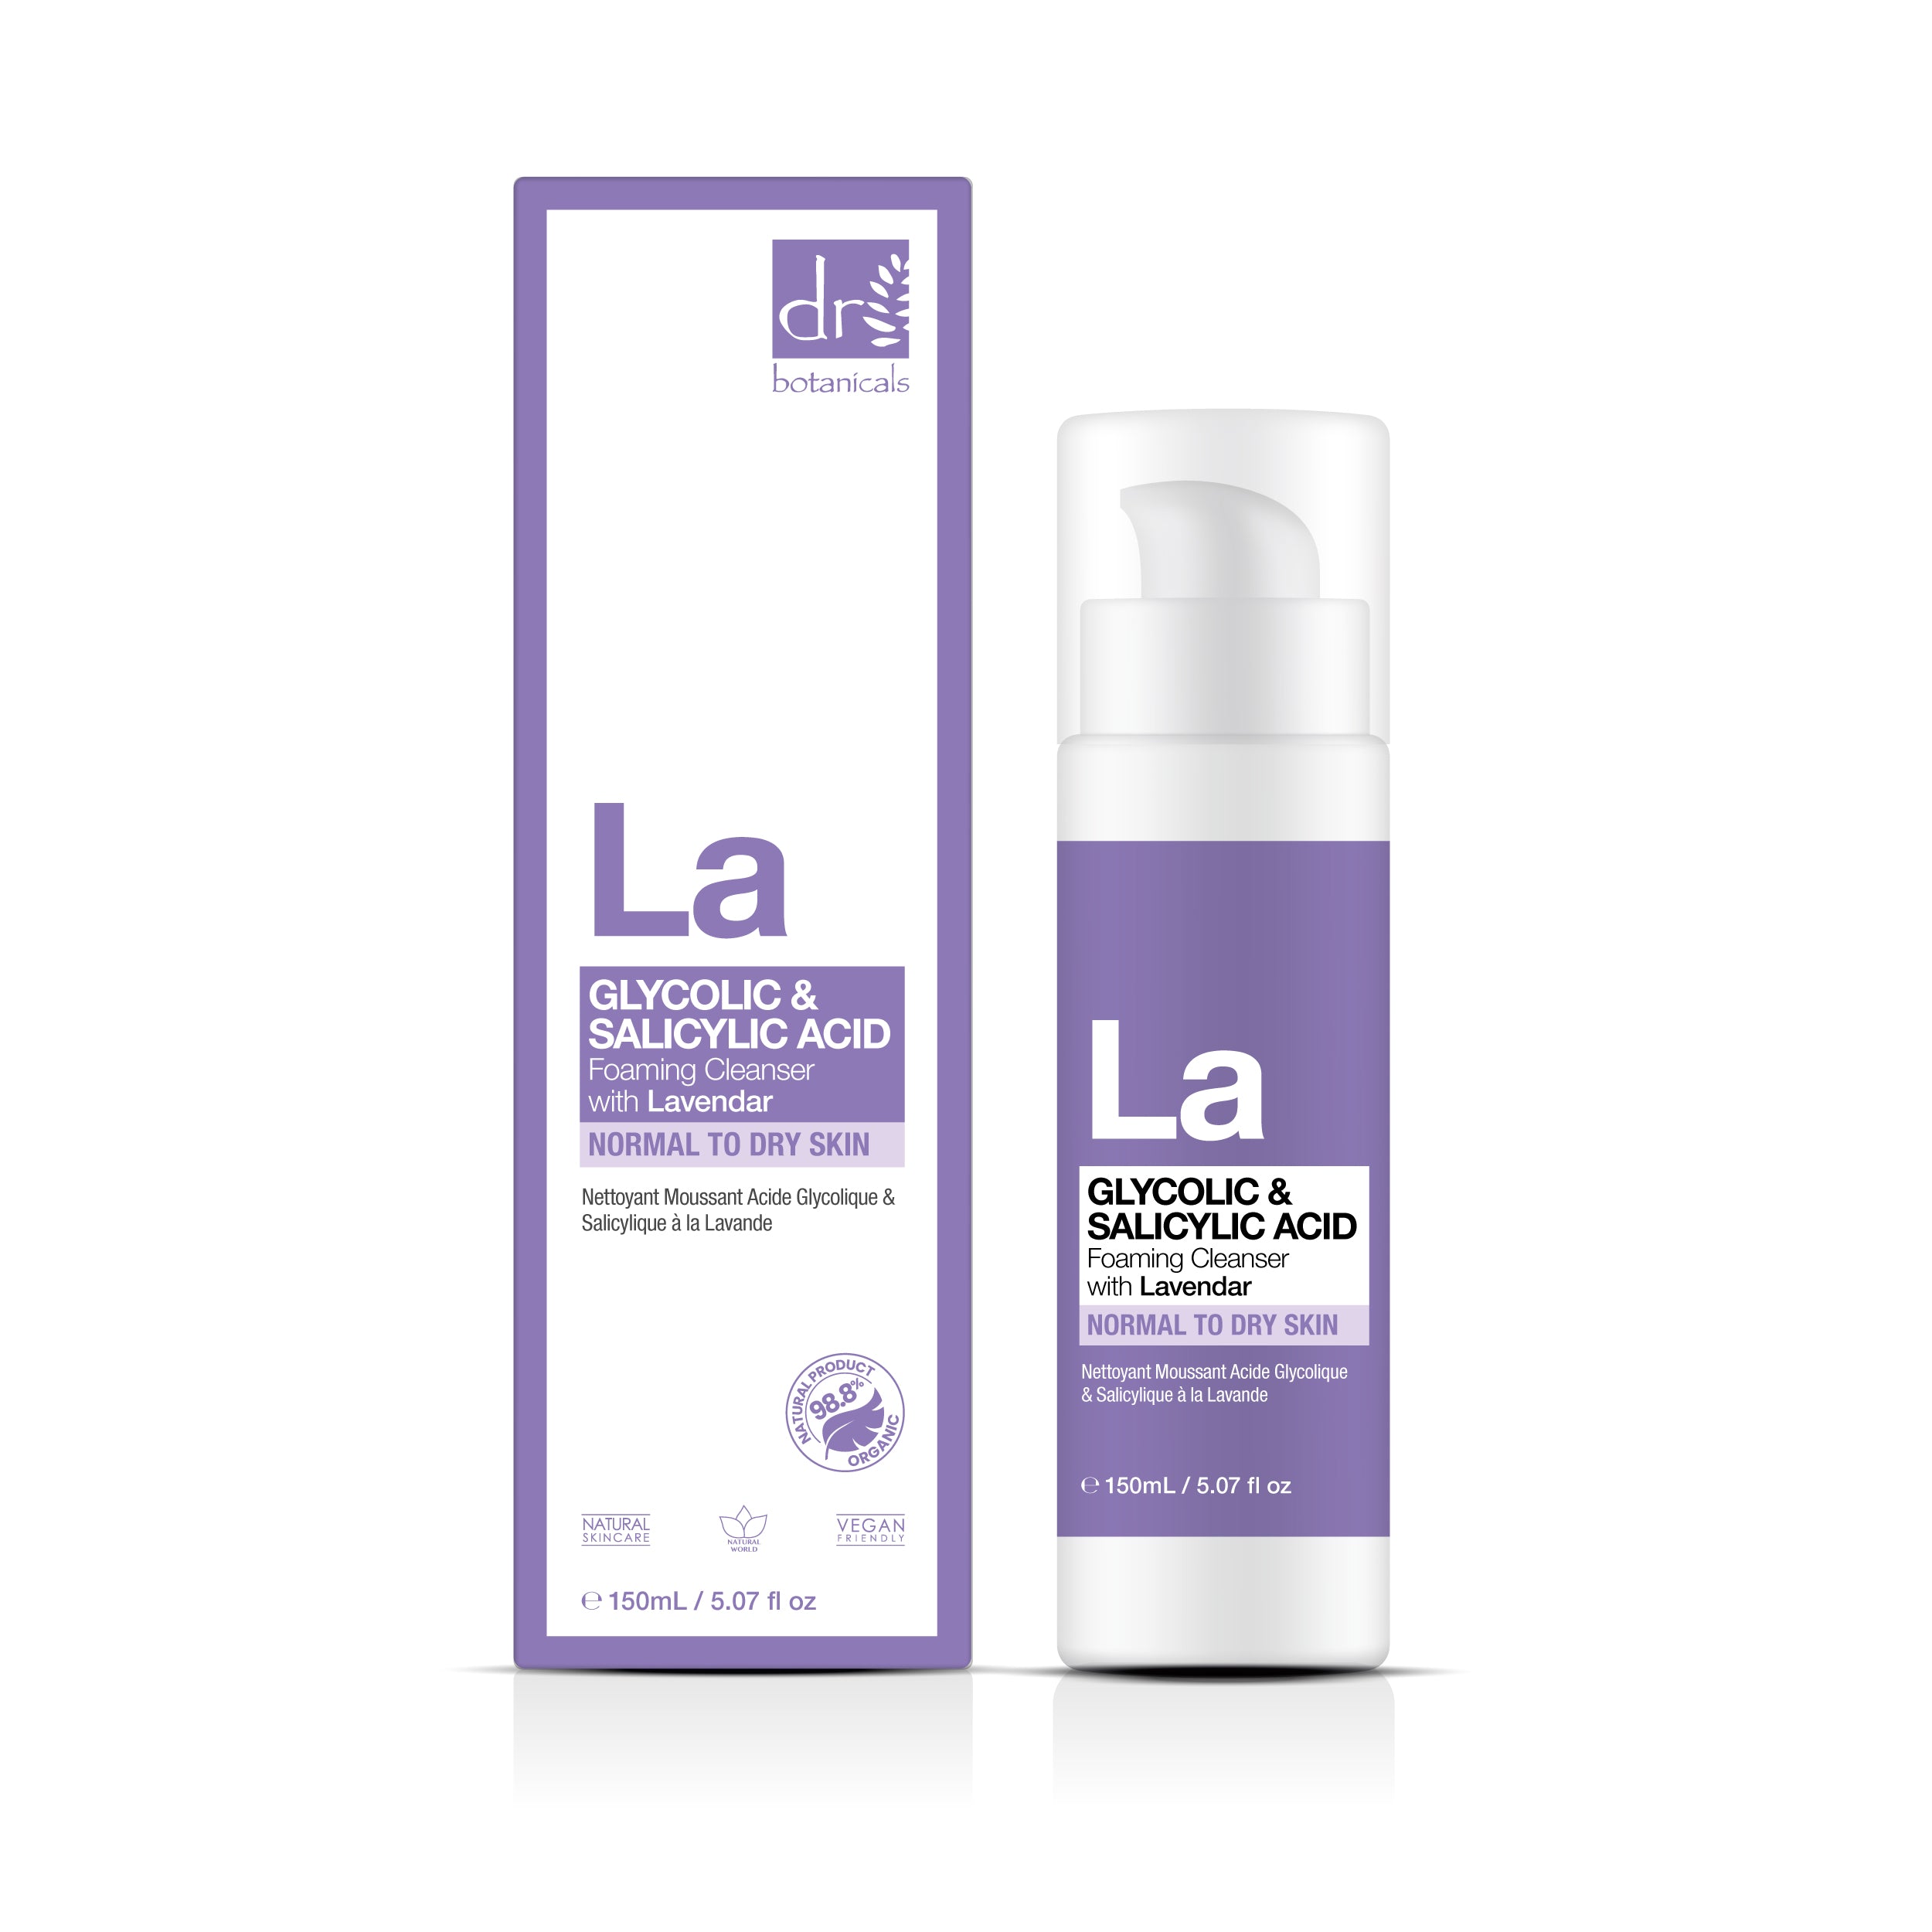 Glycolic & Salicylic Acid Foaming Cleanser with Lavender